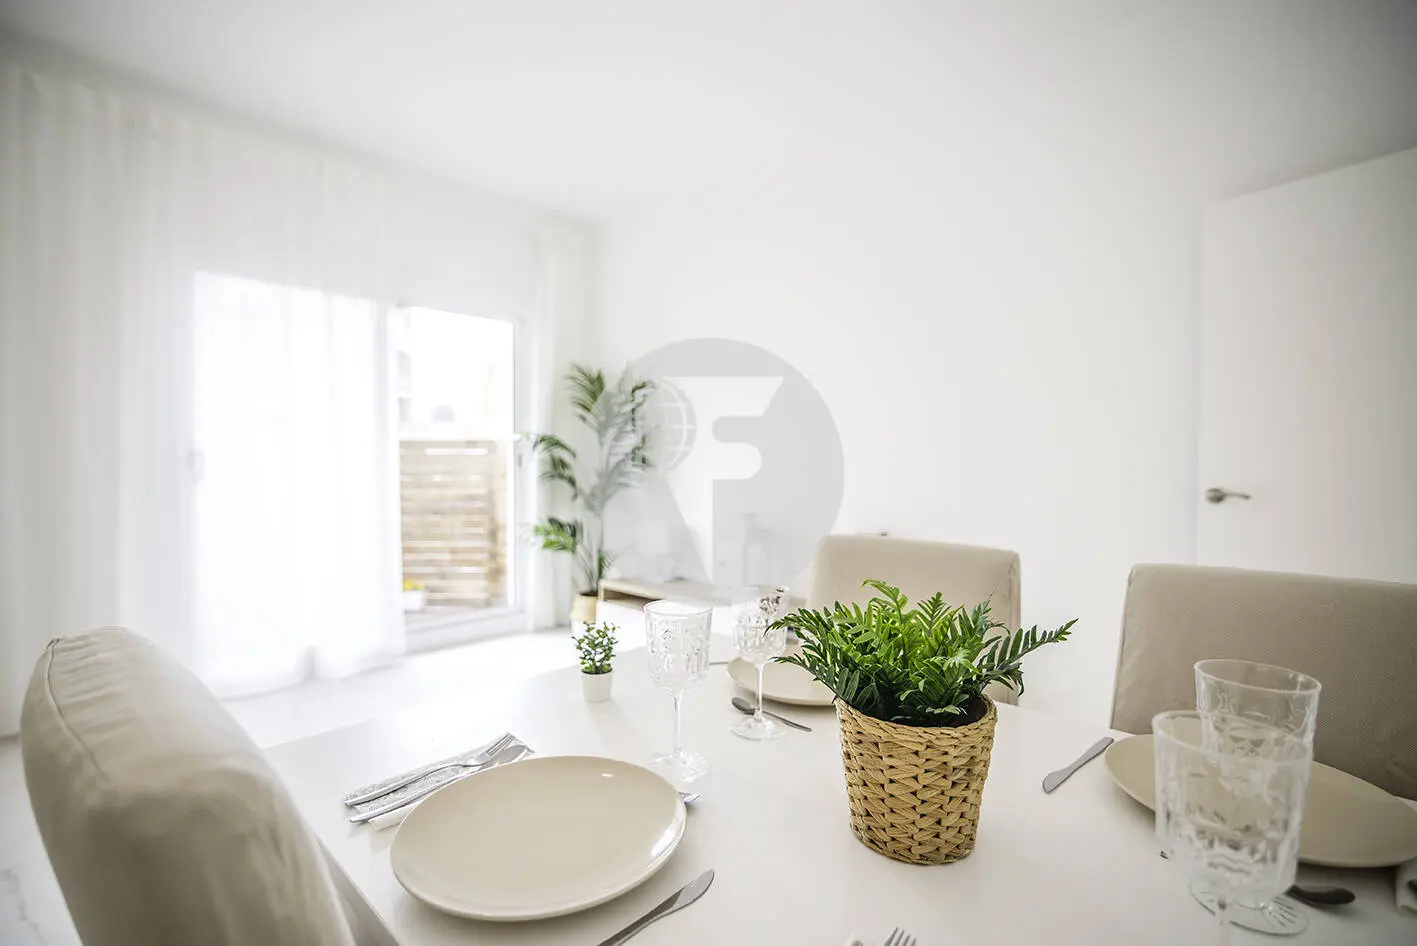 Brand new completely renovated apartment on Aragó street in the heart of El Clot in Barcelona. 7